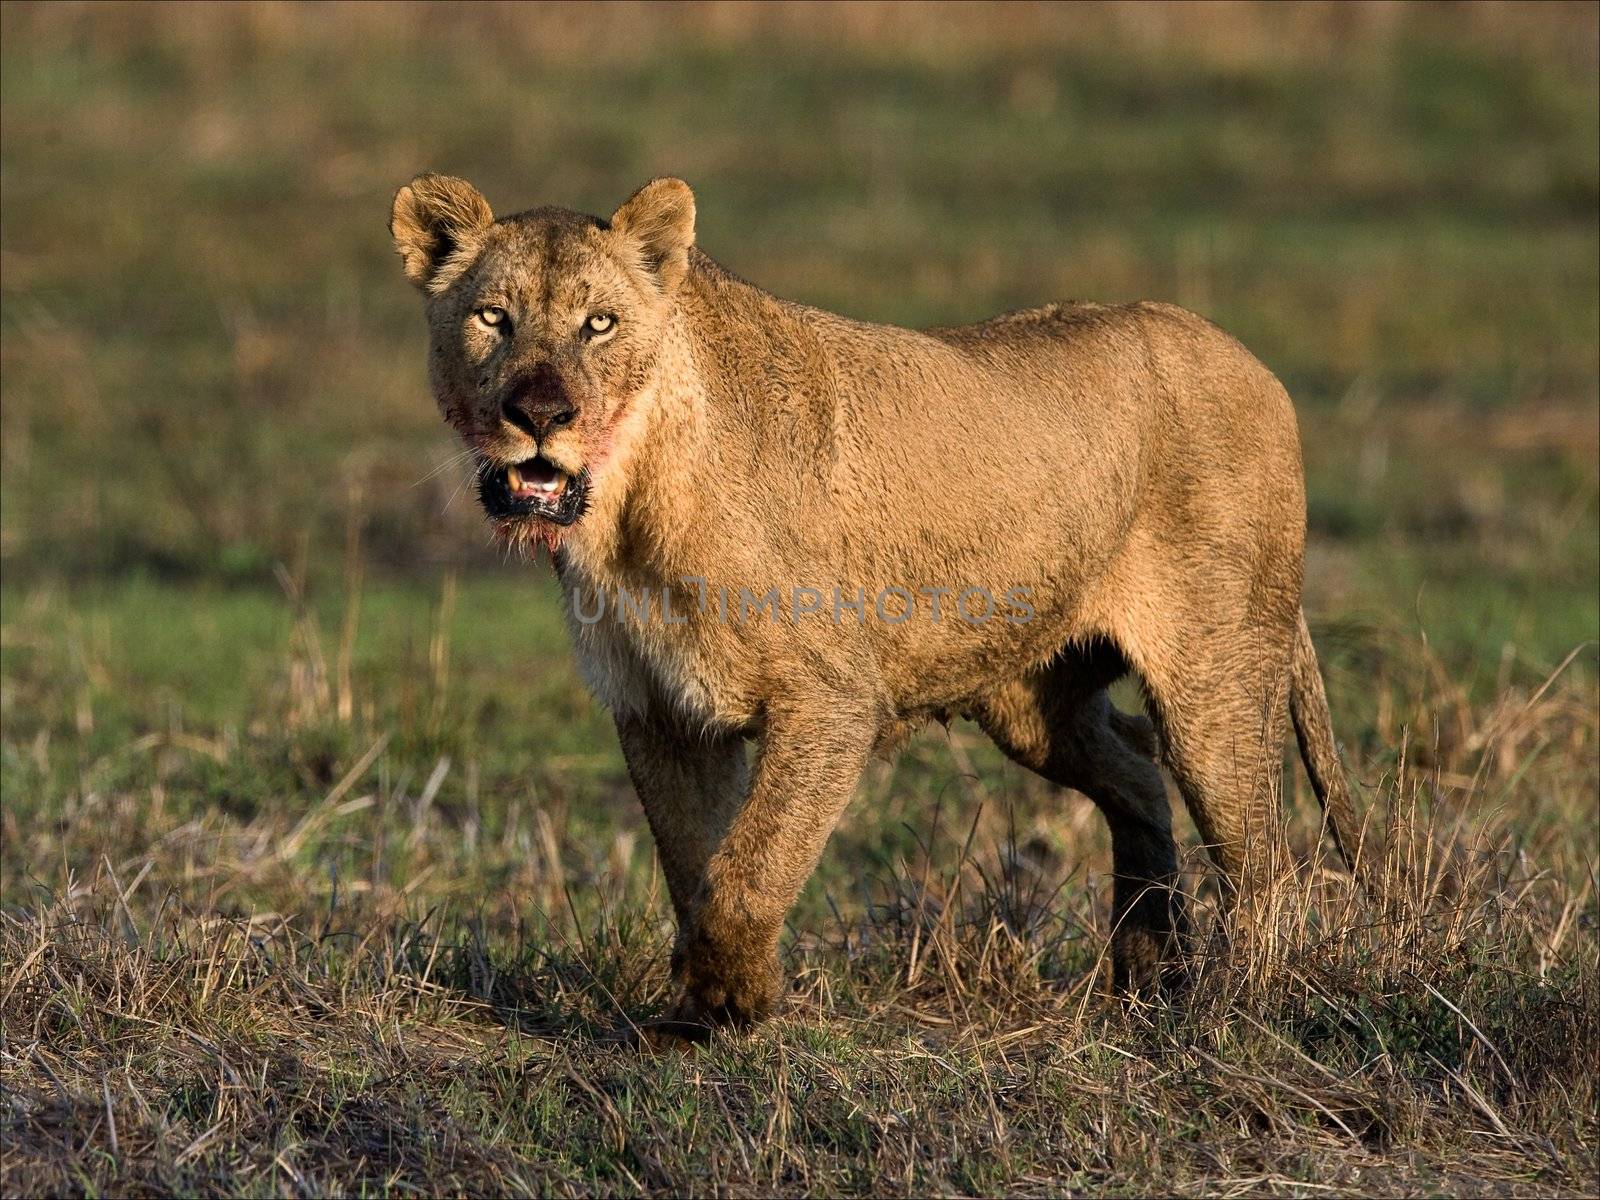 Lioness with a predatory sight and the muzzle stained with blood after meal.